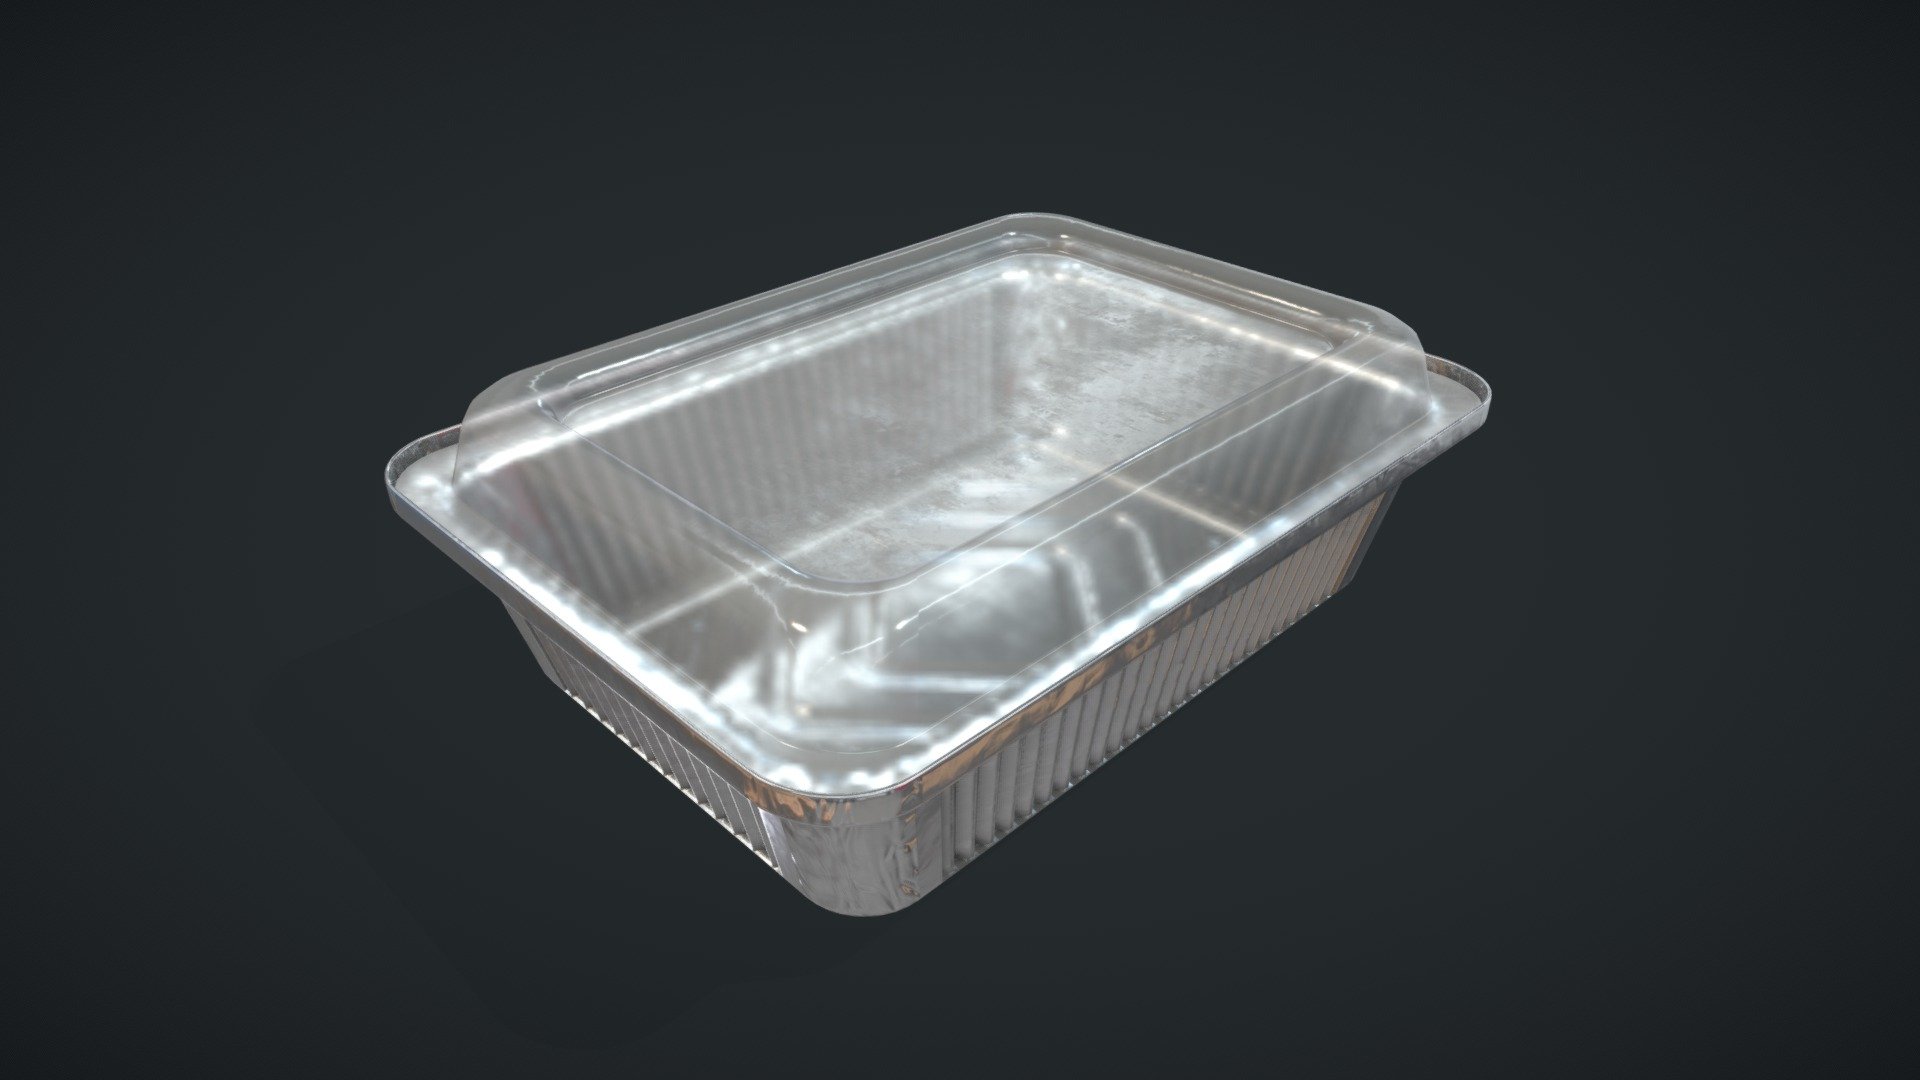 This is a 3D model of an Aluminum Food Container with Lid




Made in Blender 3.x (PBR Materials) and Rendering Cycles.

Main rendering made in Blender 3.x + Cycles using some HDR Environment Textures Images for lighting which is NOT provided in the package!

What does this package include?




3D Modeling of an Aluminum Food Container with Lid

2K and 4K Textures (Base Color, Normal Map, Metallic ,Roughness, Ambient Occlusion and Opacity)

Important notes




File format included - (Blend, FBX, OBJ, GLB, STL)

Texture size - 2K and 4K

Uvs non - overlapping

Polygon: Quads

Centered at 0,0,0

In some formats may be needed to reassign textures and add HDR Environment Textures Images for lighting.

Not lights include

No special plugin needed to open the scene.

If you like my work, please leave your comment and like, it helps me a lot to create new content. If you have any questions or changes about colors or another thing, you can contact me at we3domodel@gmail.com - Aluminum Food Container with Lid - Buy Royalty Free 3D model by We3Do (@we3DoModel) 3d model